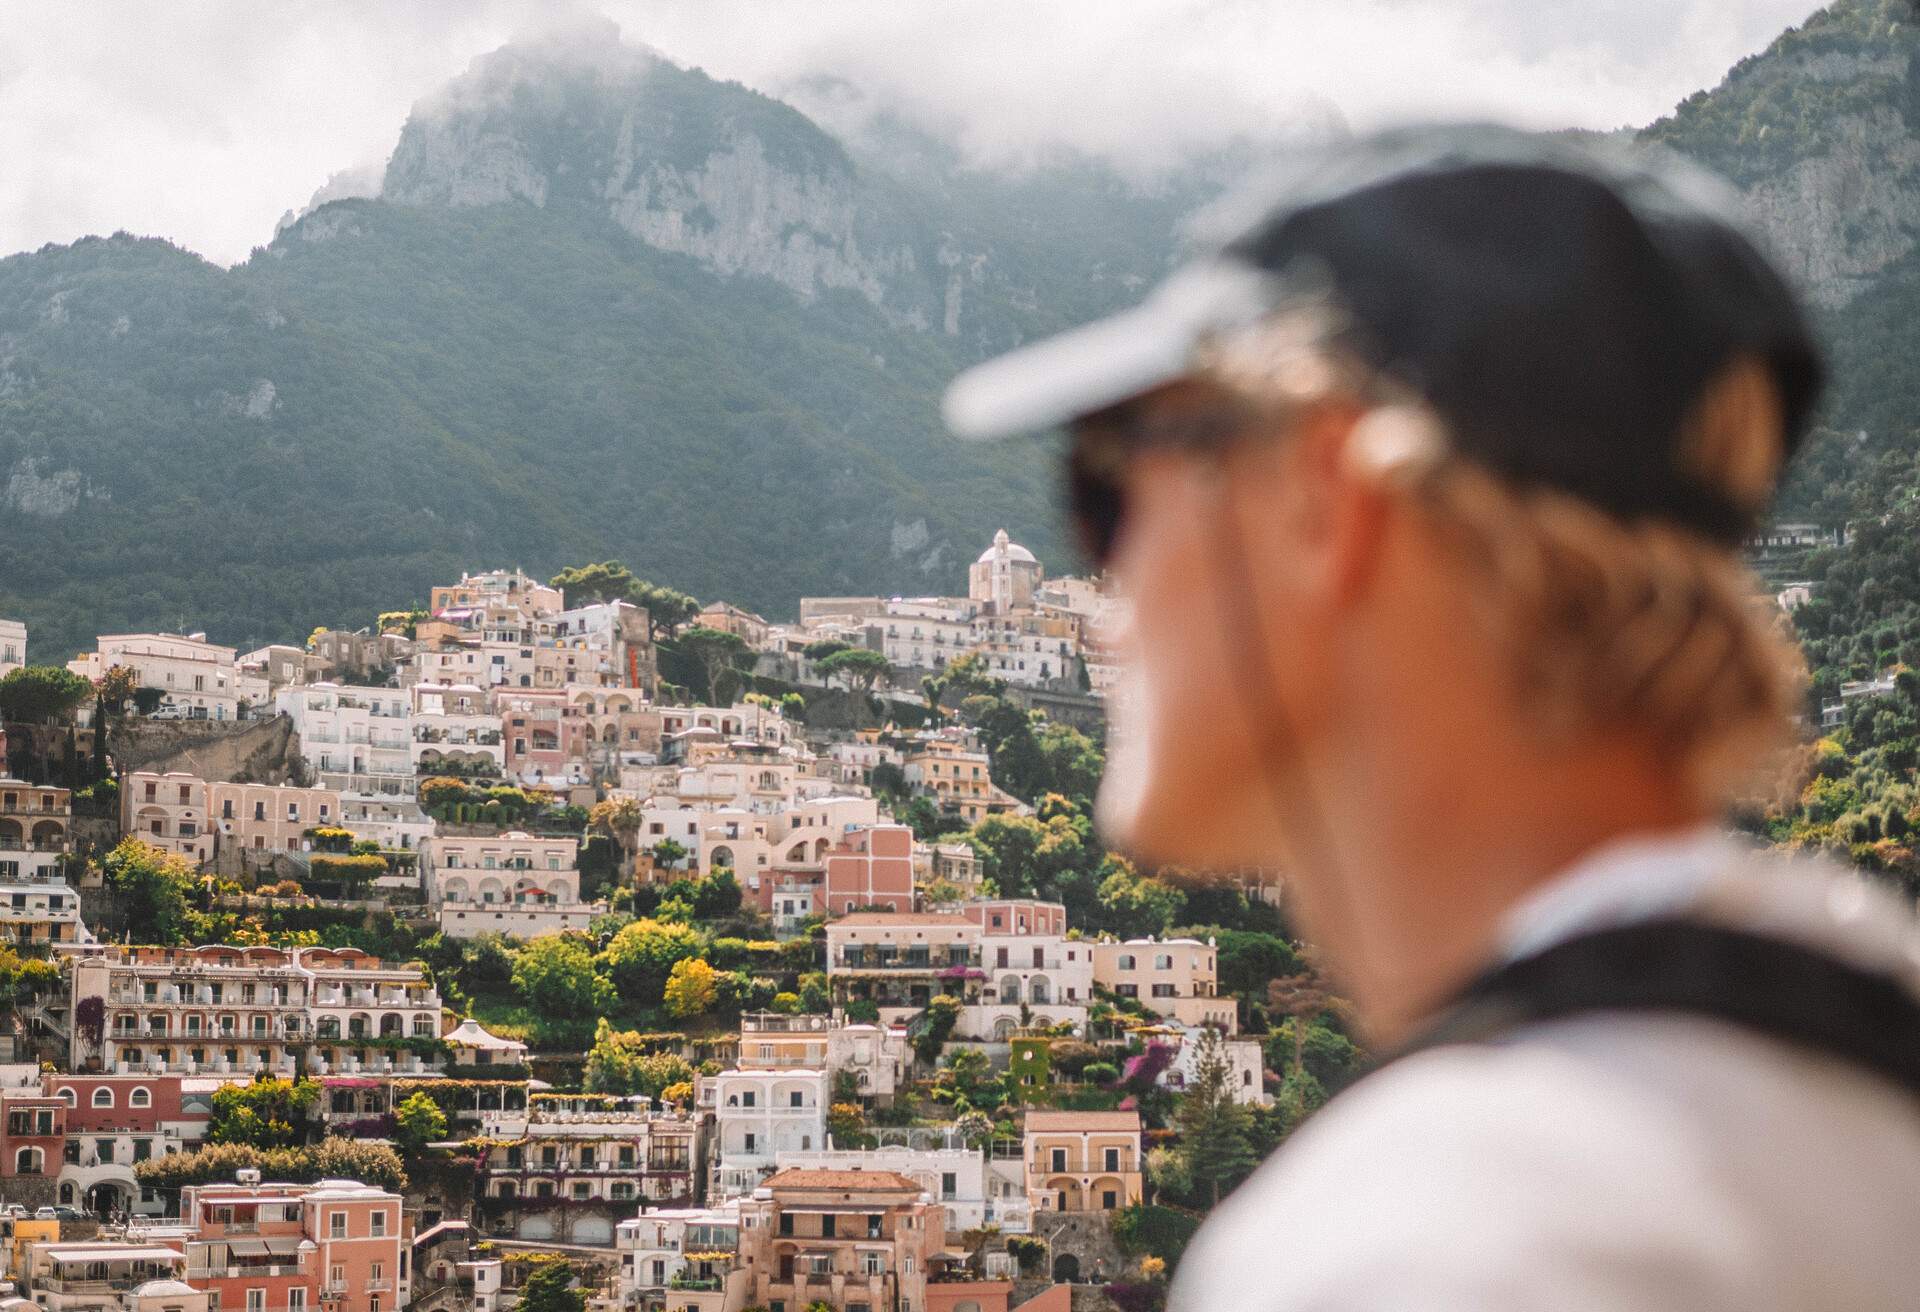 DEST_ITALY_AMALFI_MAN_GettyImages